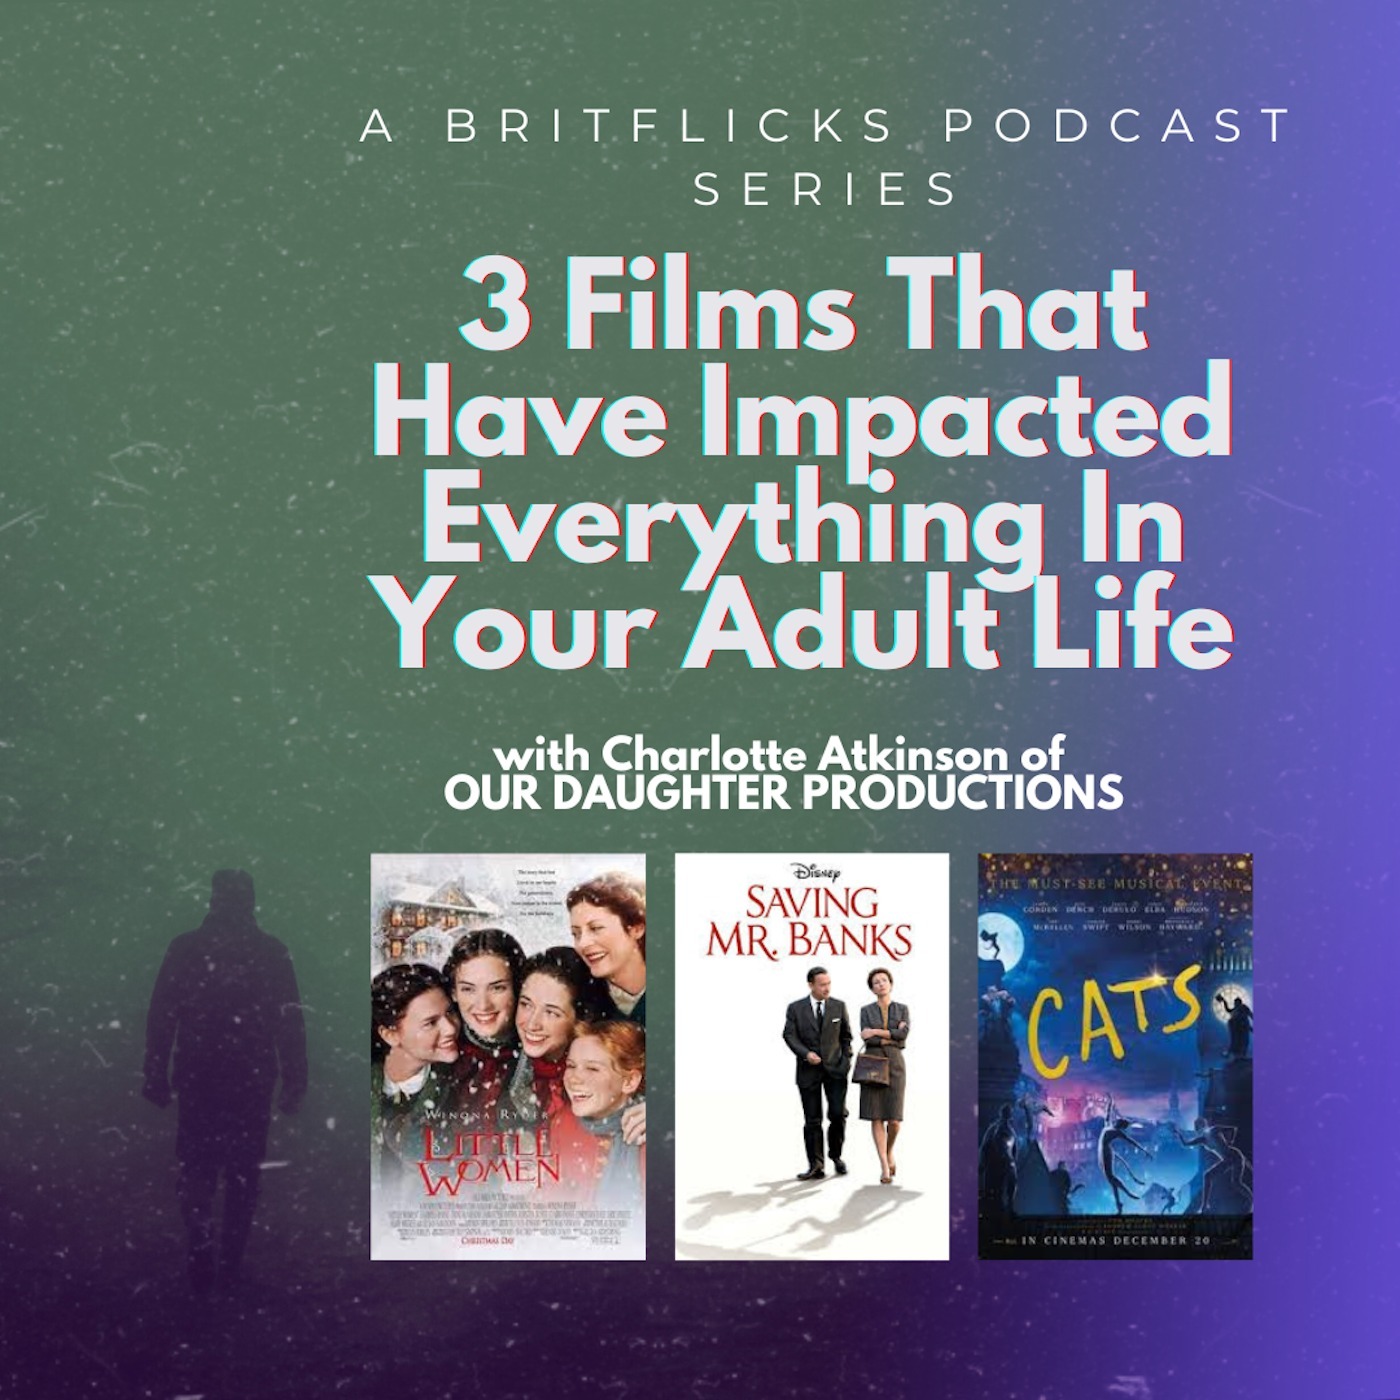 3 Films That Have Impacted Everything In Your Adult Life with film producer Charlotte Atkinson of OUR DAUGHTER PRODUCTIONS